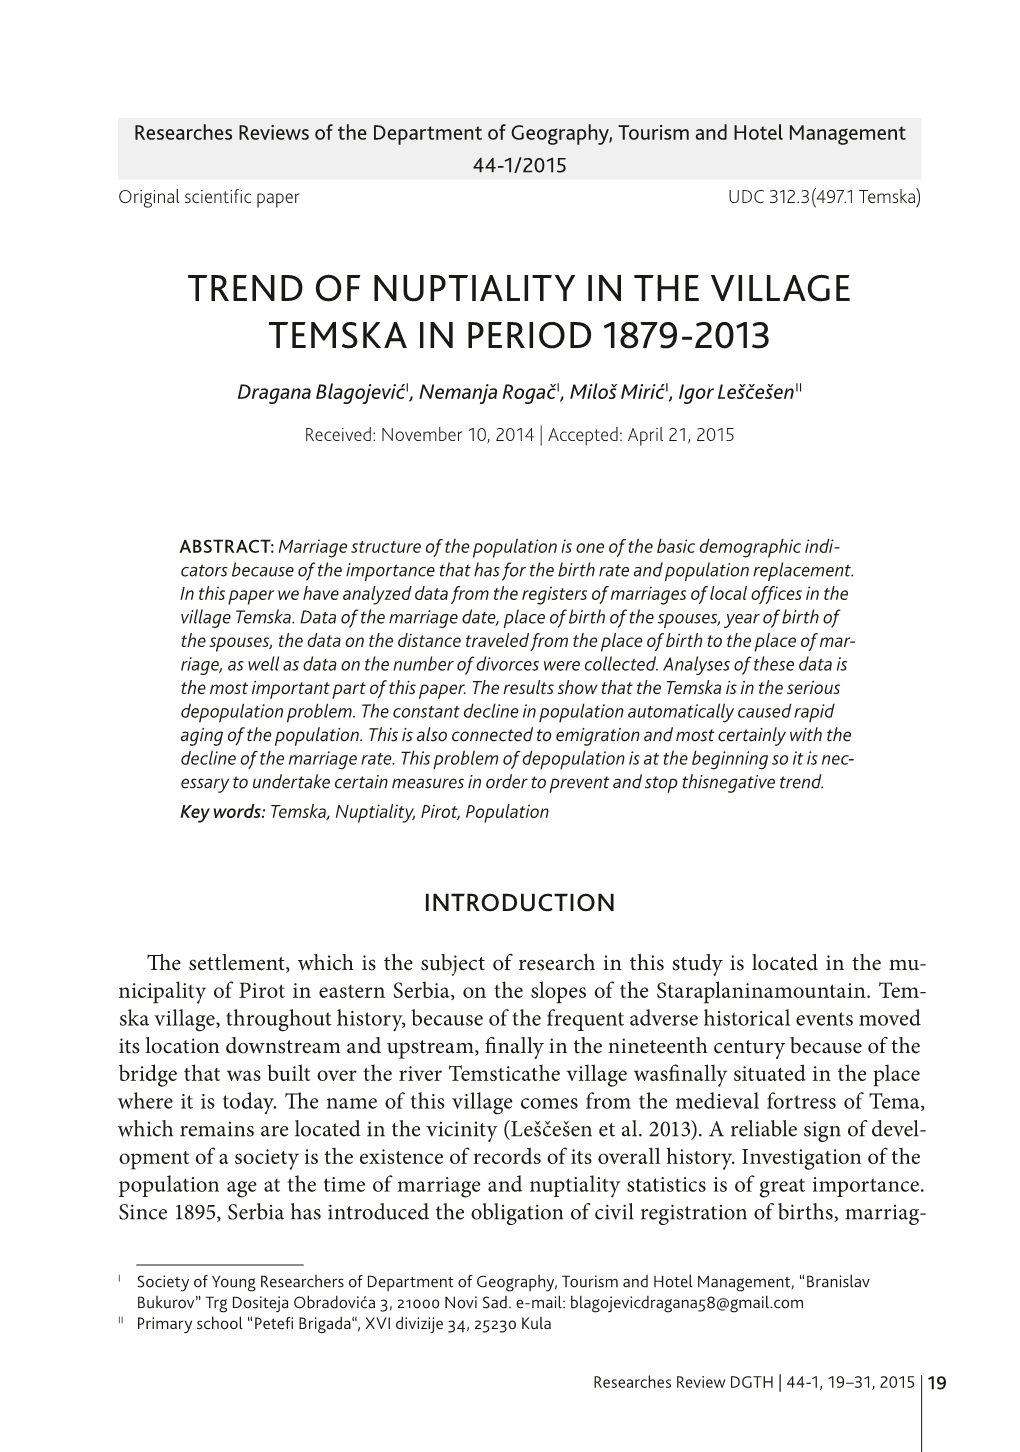 Trend of Nuptiality in the Village Temska in Period 1879-2013